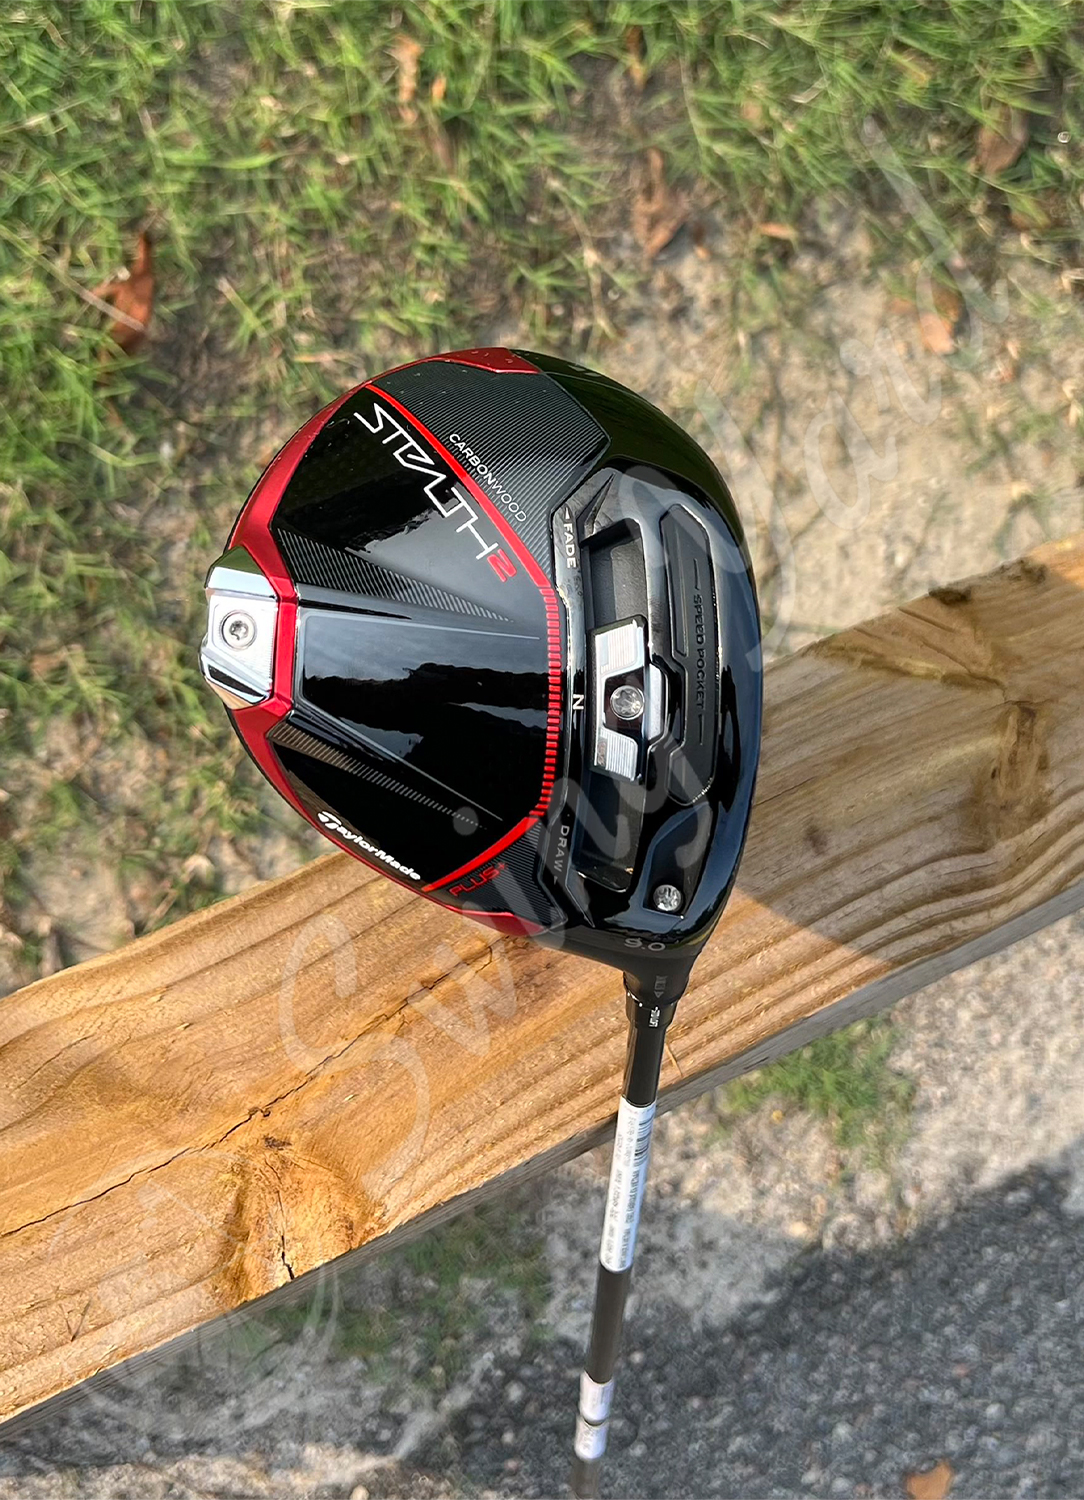 A new TaylorMade Stealth 2 Plus driver for testing at the golf course